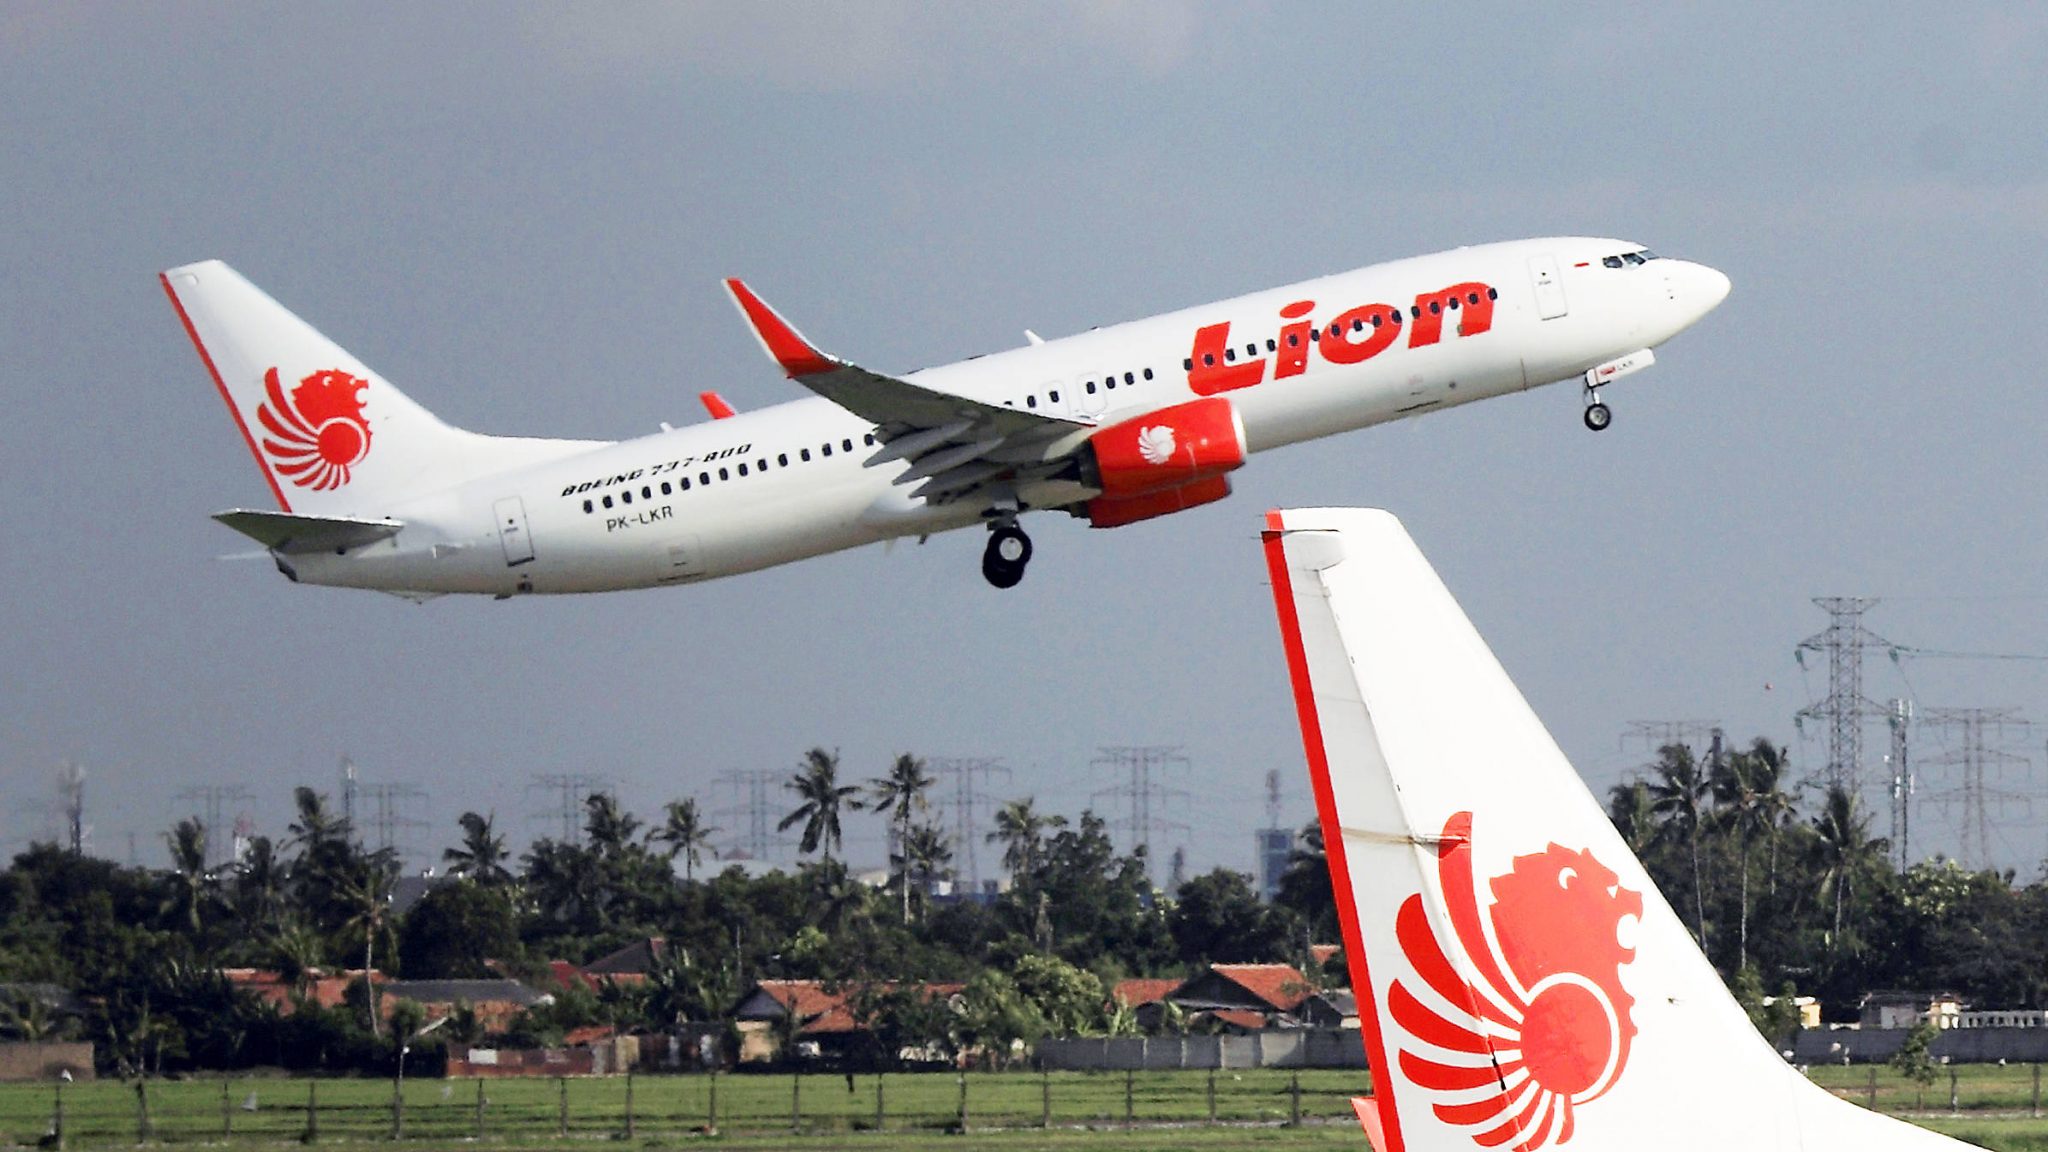 Lion Air crash: Indonesia Airline Has a Poor Safety Record